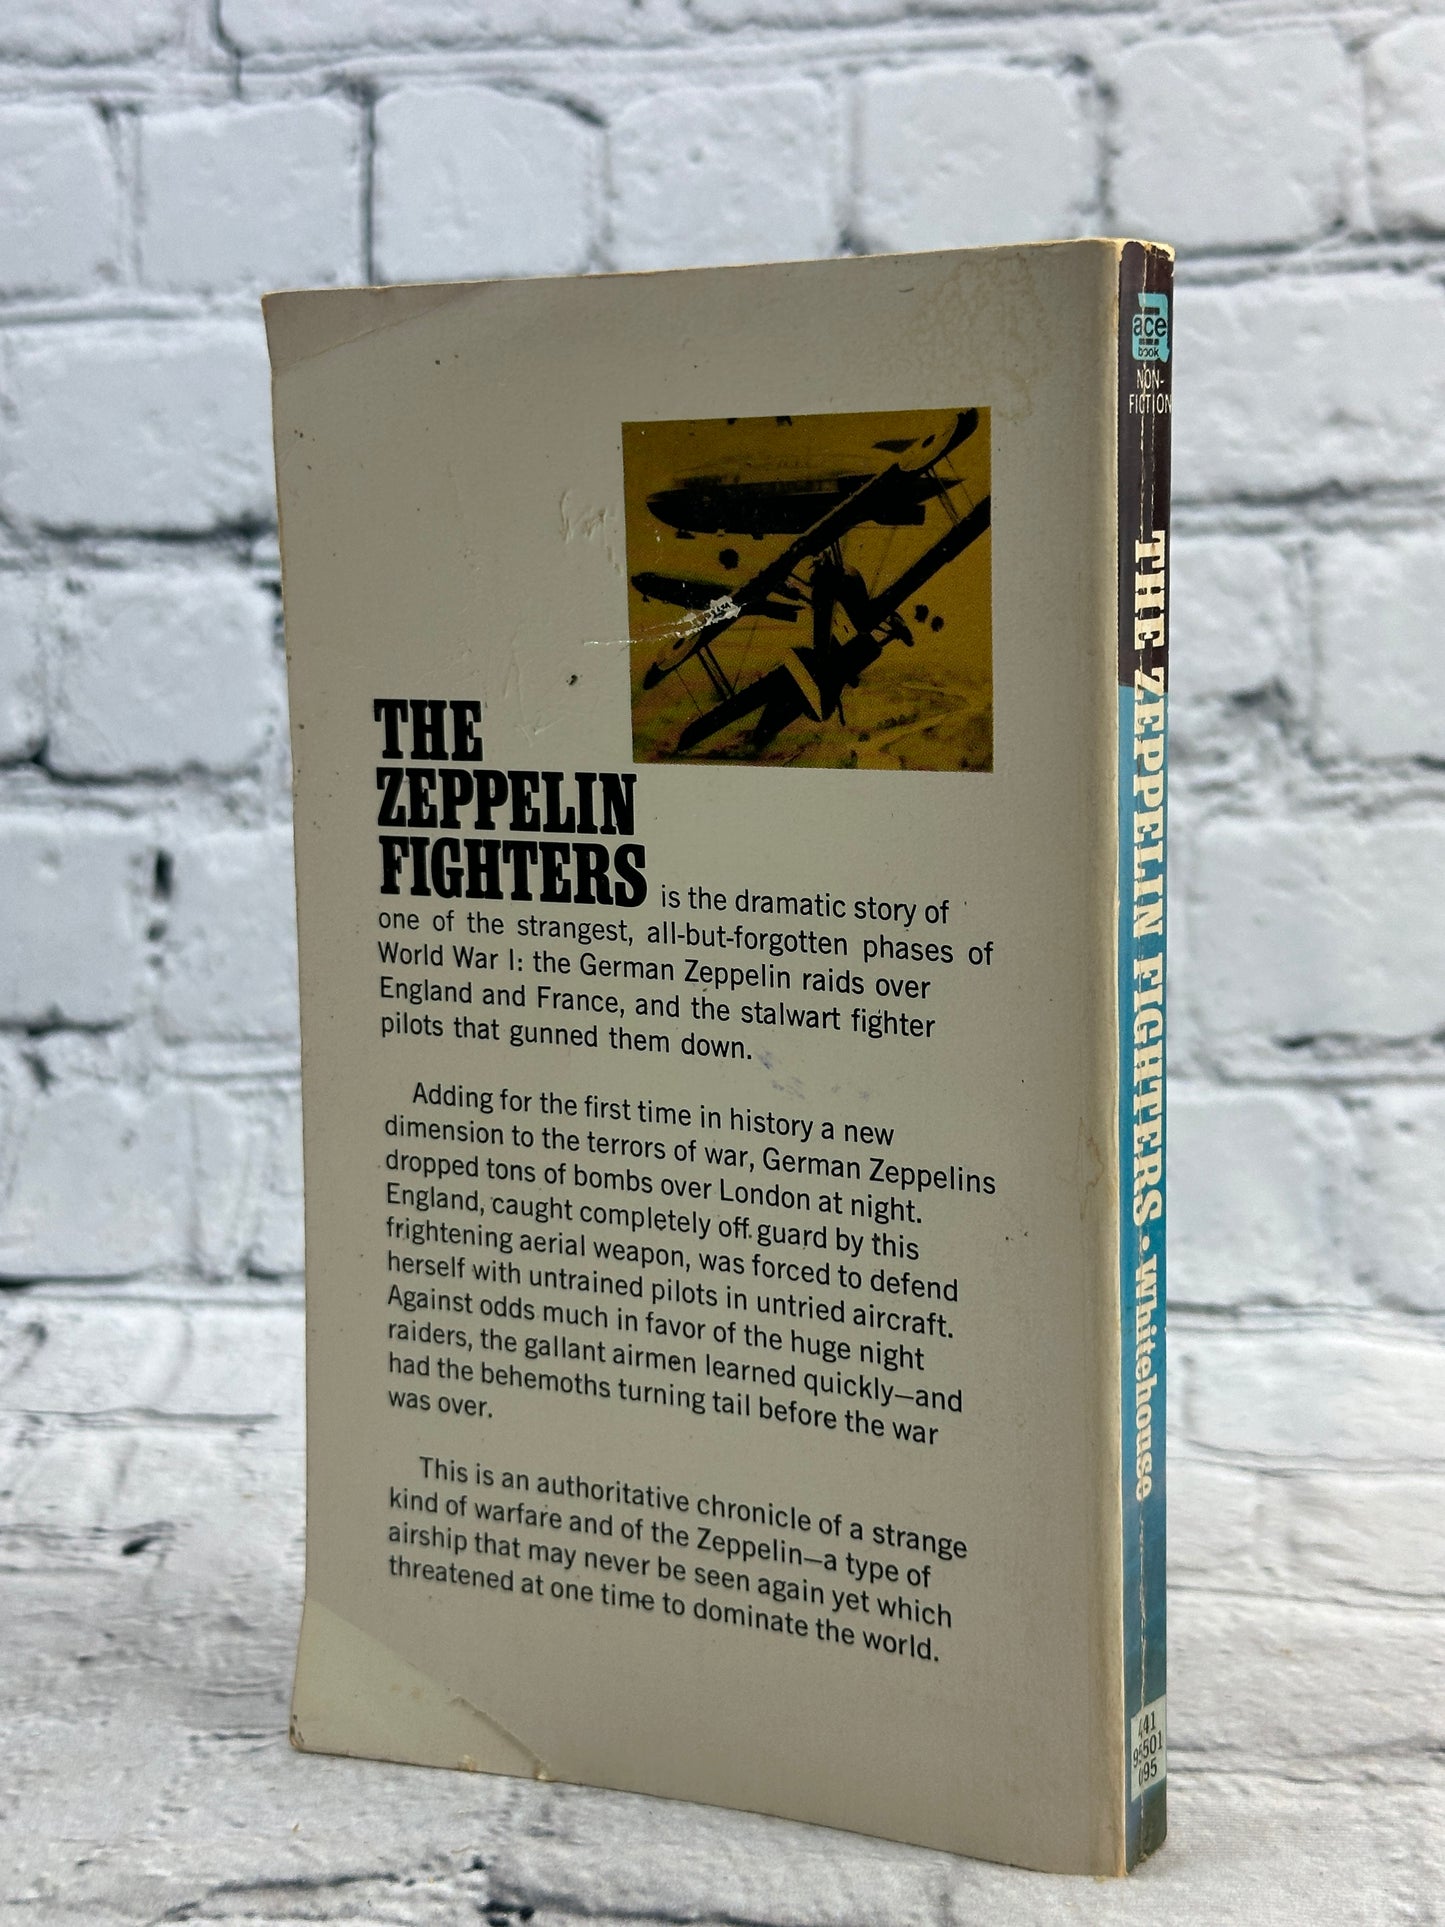 The Zeppelin Fighters by Arch Whitehouse [1966]